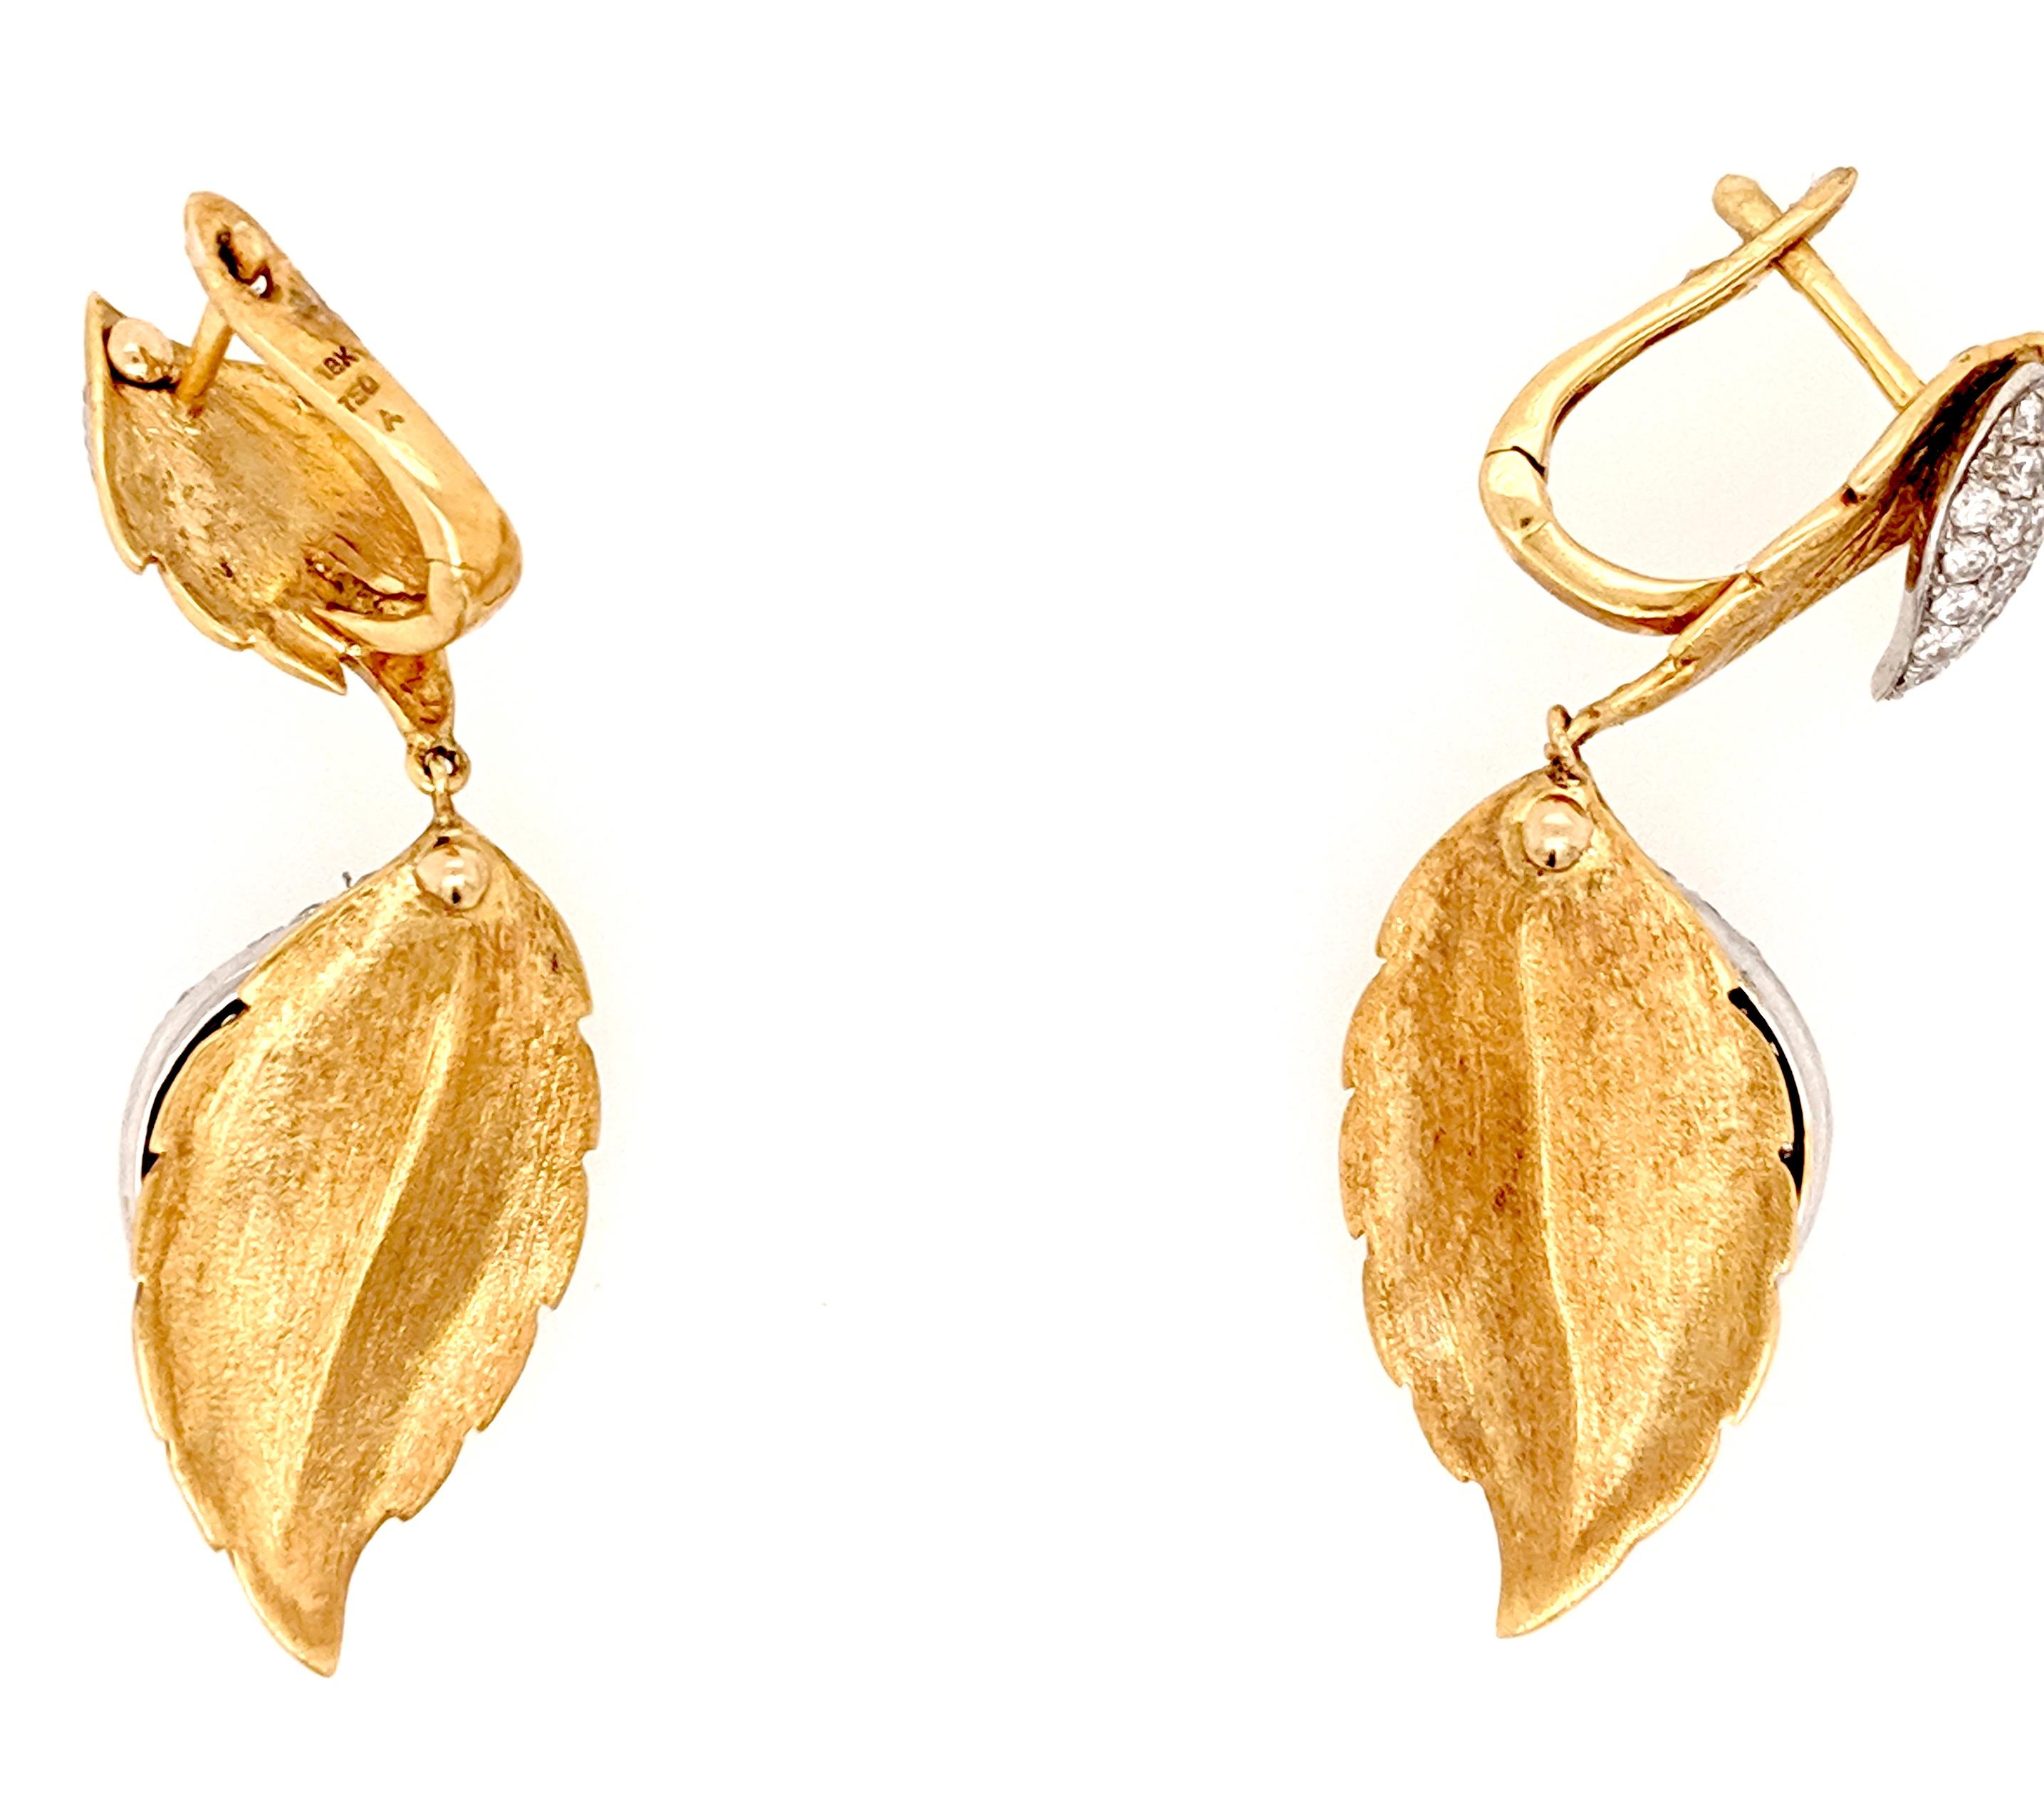 A Pair of Leaf shaped earrings crafted in 18k yellow gold featuring 146 round diamonds weighing approximately 1.51cttw with a color of I/J and a clarity of SI1- SI3. The earrings measure 1,3/4